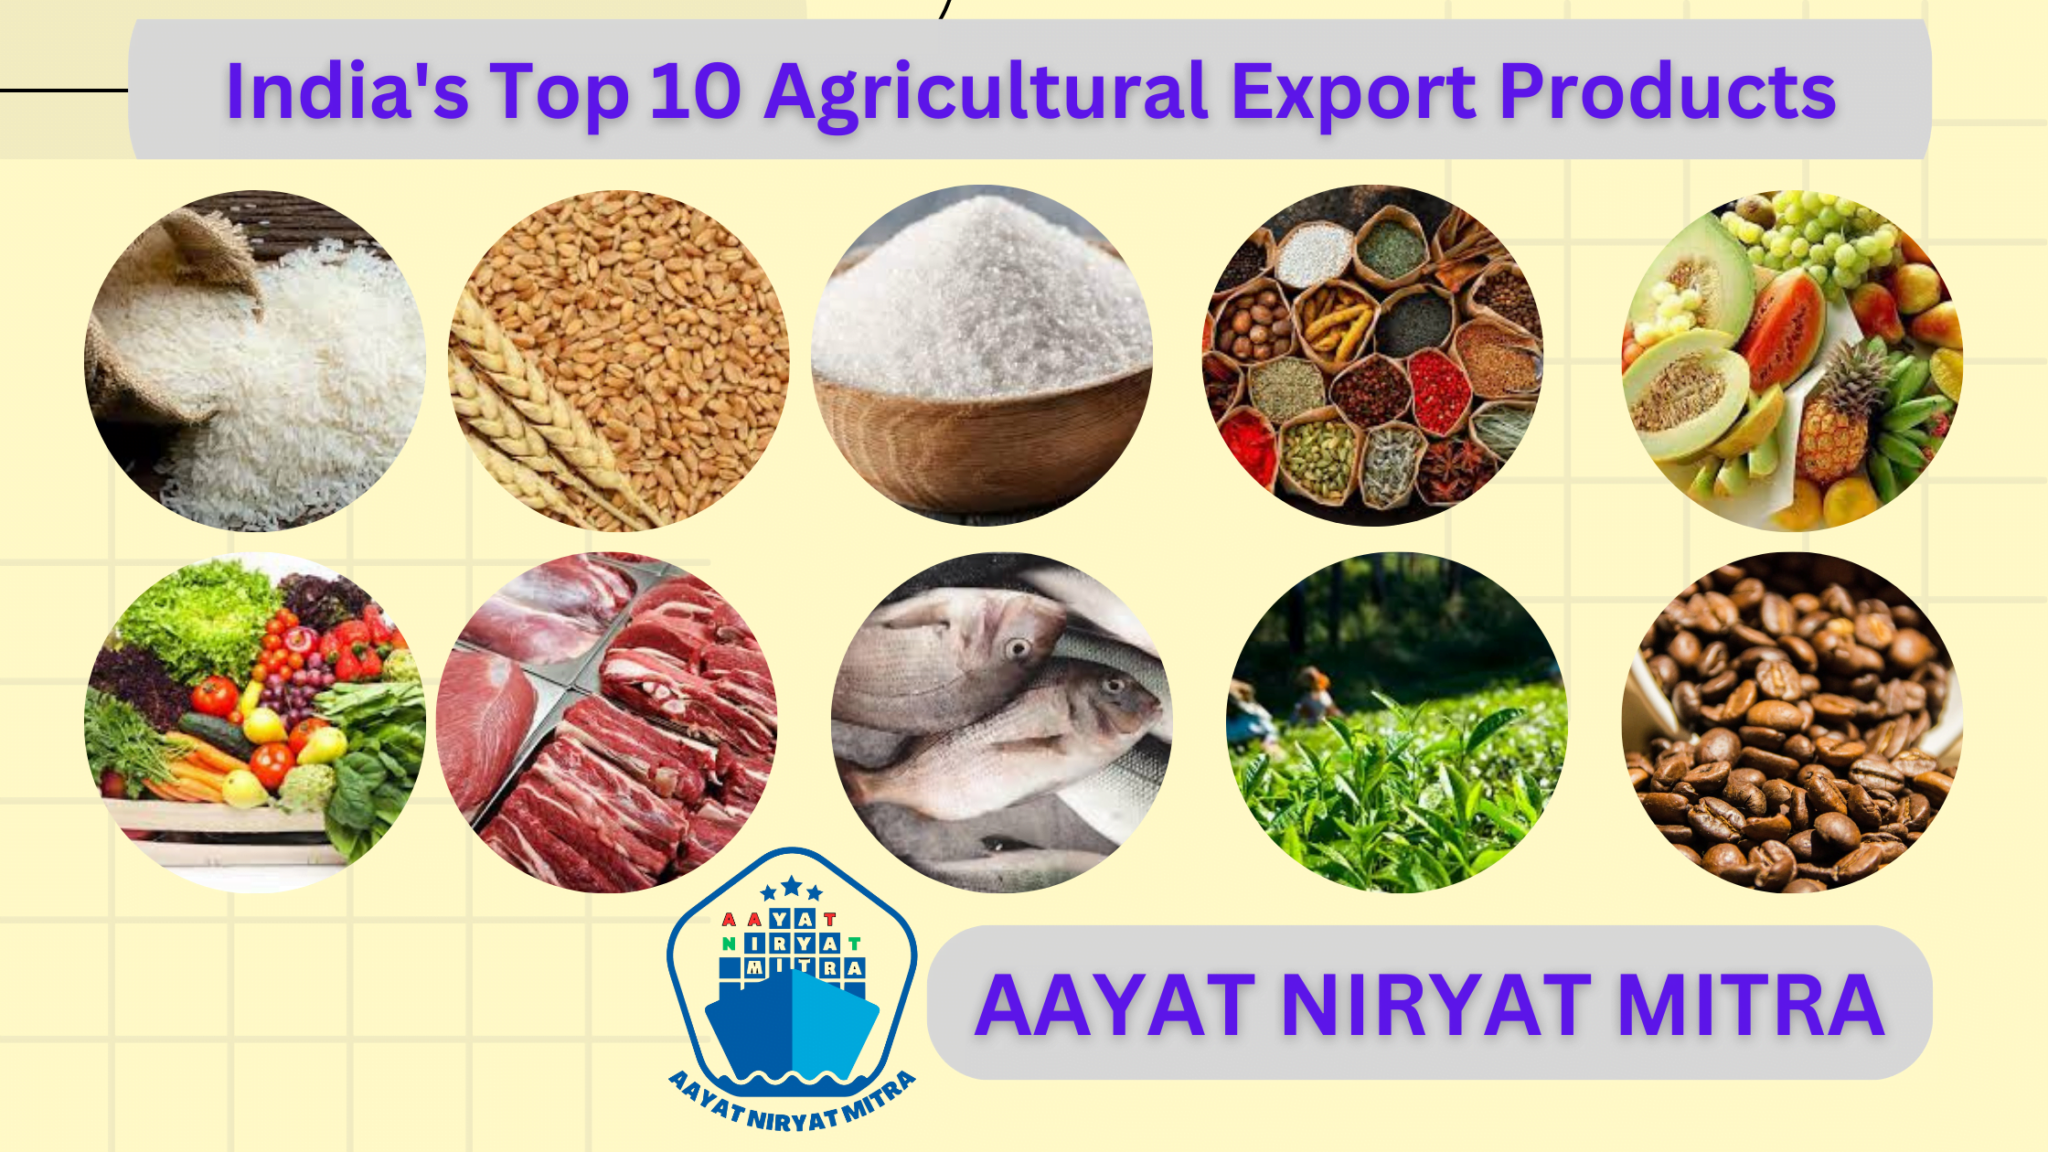 Top 10 Agricultural Export Products